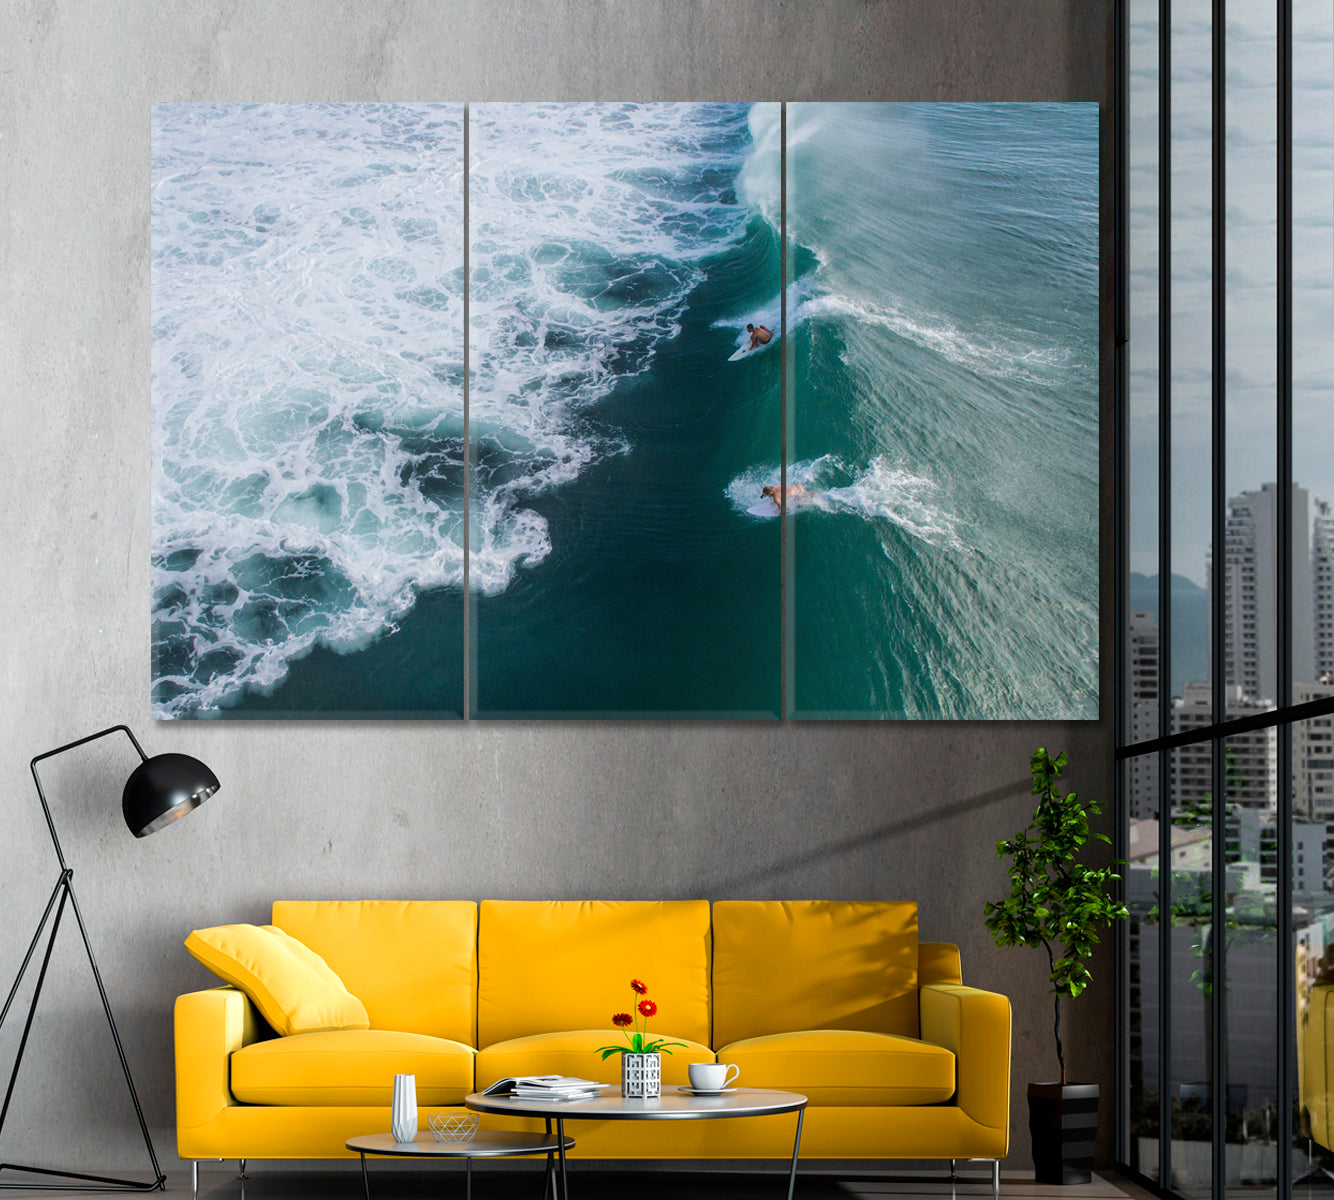 Surfers on Wave Bali Indonesia Canvas Print ArtLexy 3 Panels 36"x24" inches 